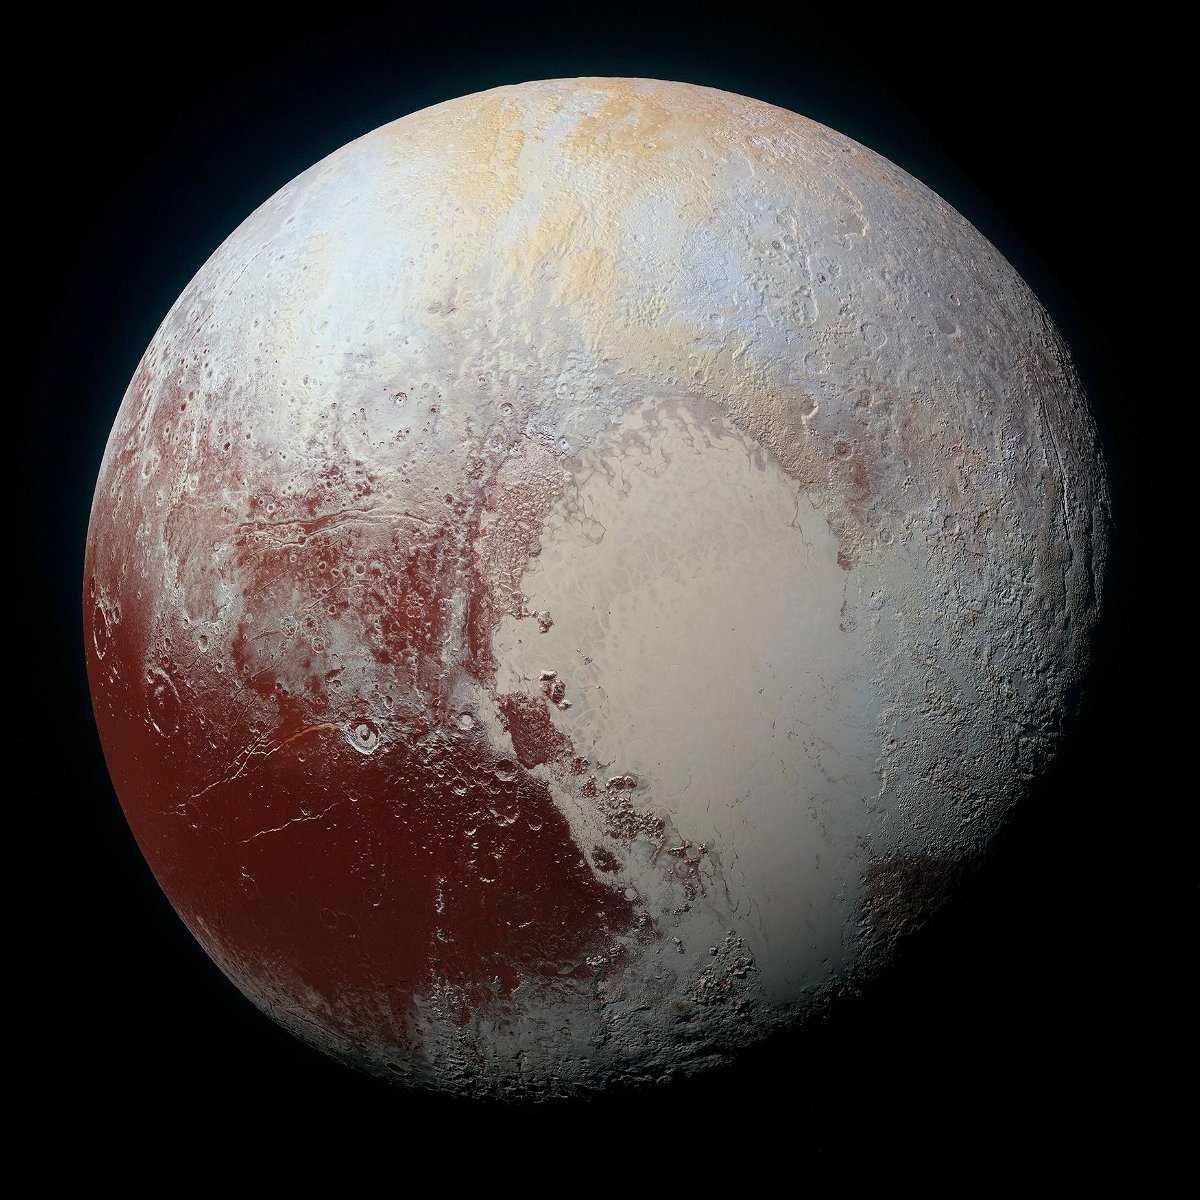 <i>Johns Hopkins University Applied Physics Laboratory/Southwest Research Institute/NASA via CNN Newsource</i><br/>The New Horizons spacecraft took an image of Pluto's heart on July 14